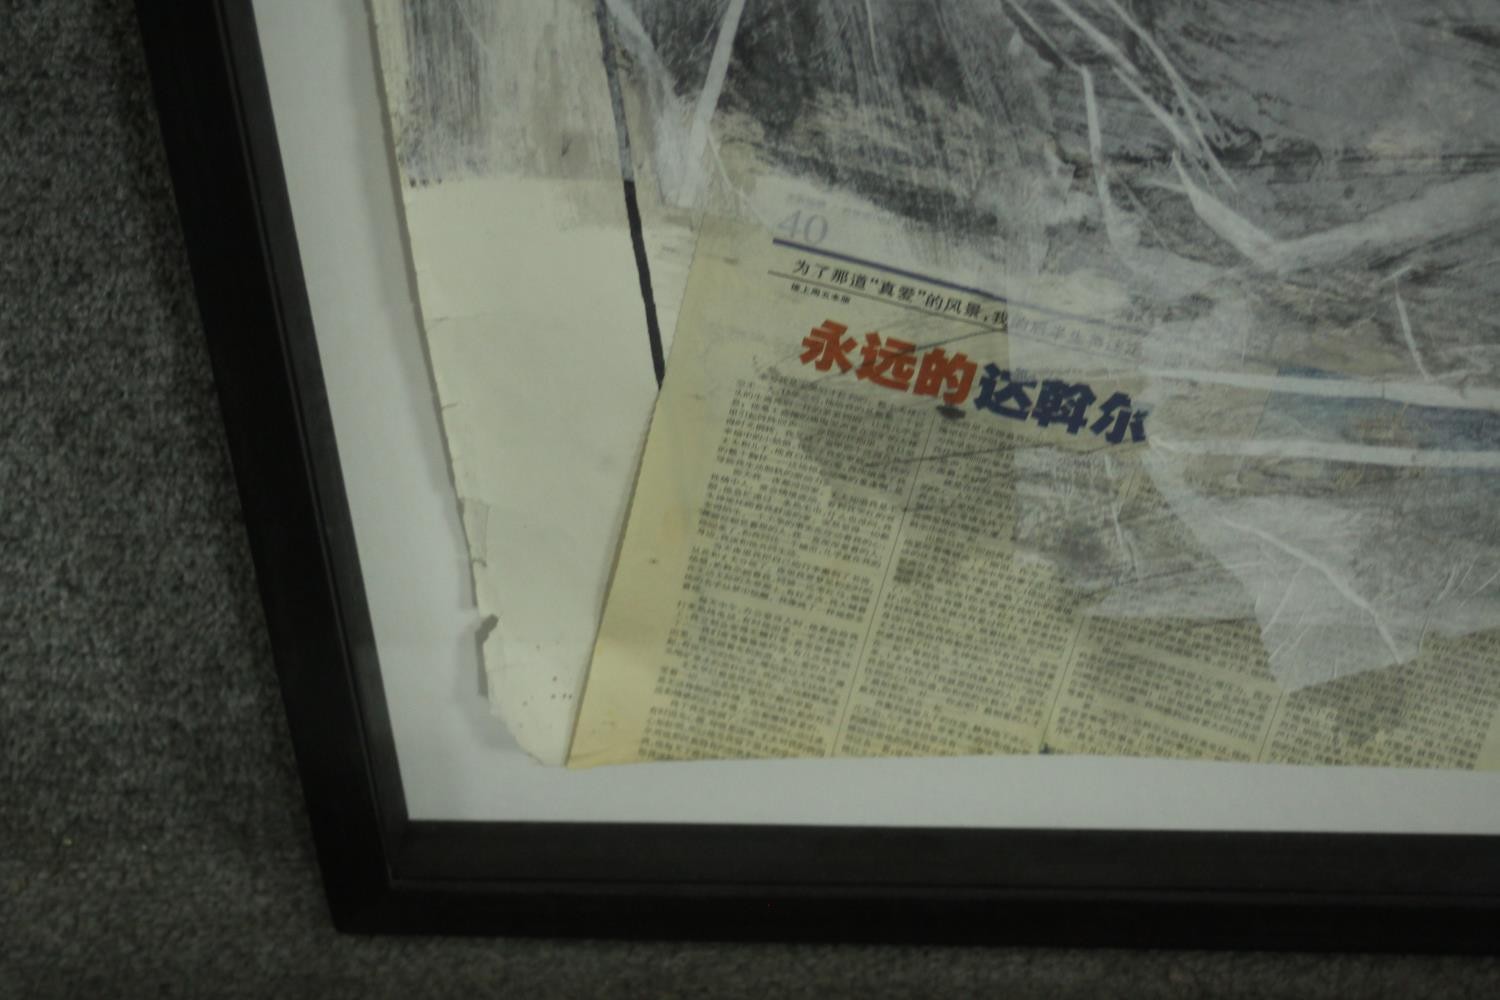 He Hong Wei, 1971, "Untitled" Mixed media on paper, label verso. H.121 W.90cm. - Image 5 of 10